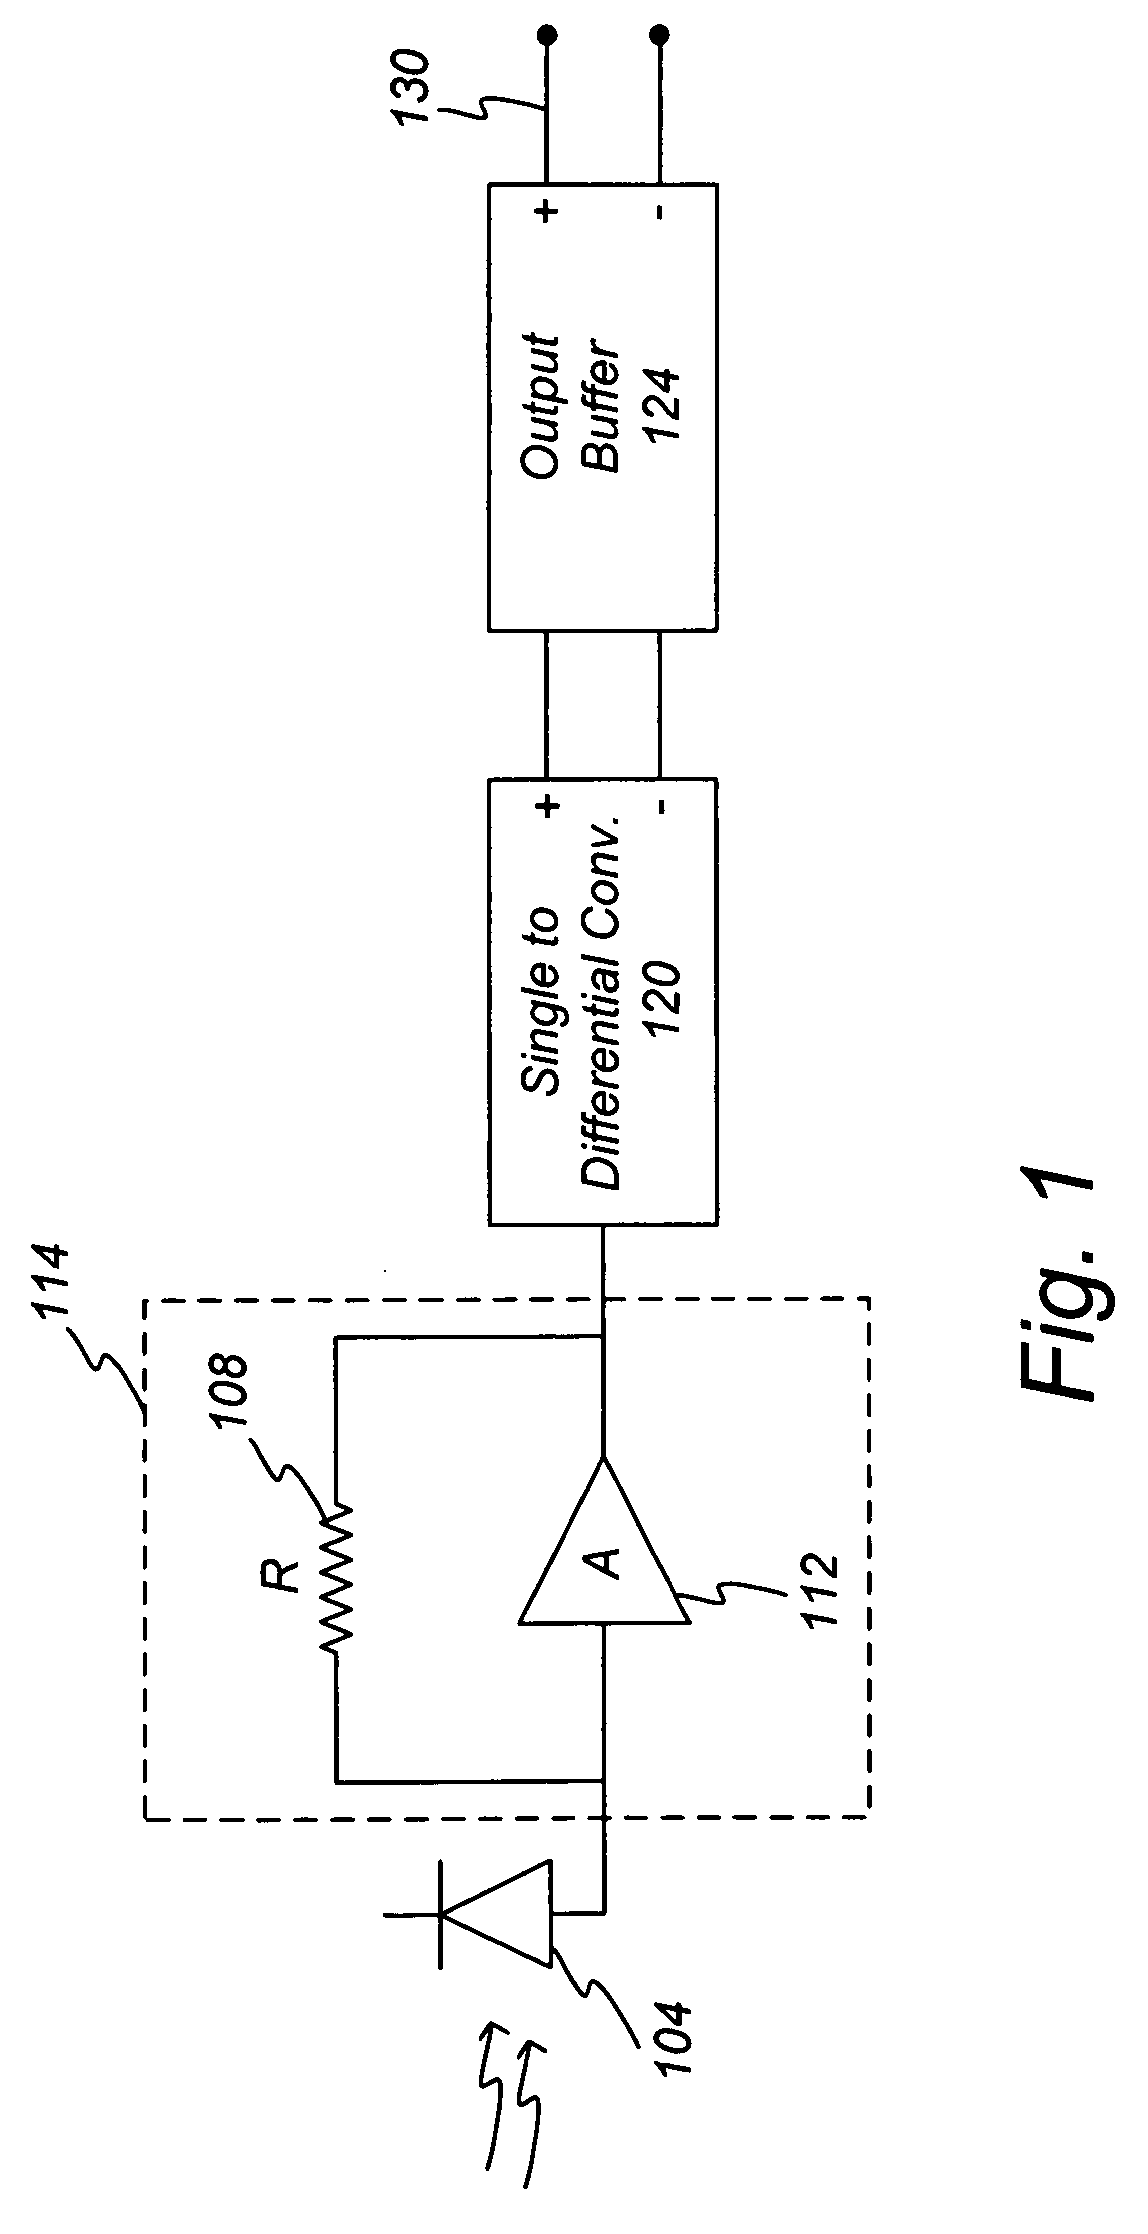 High sensitivity two-stage amplifier